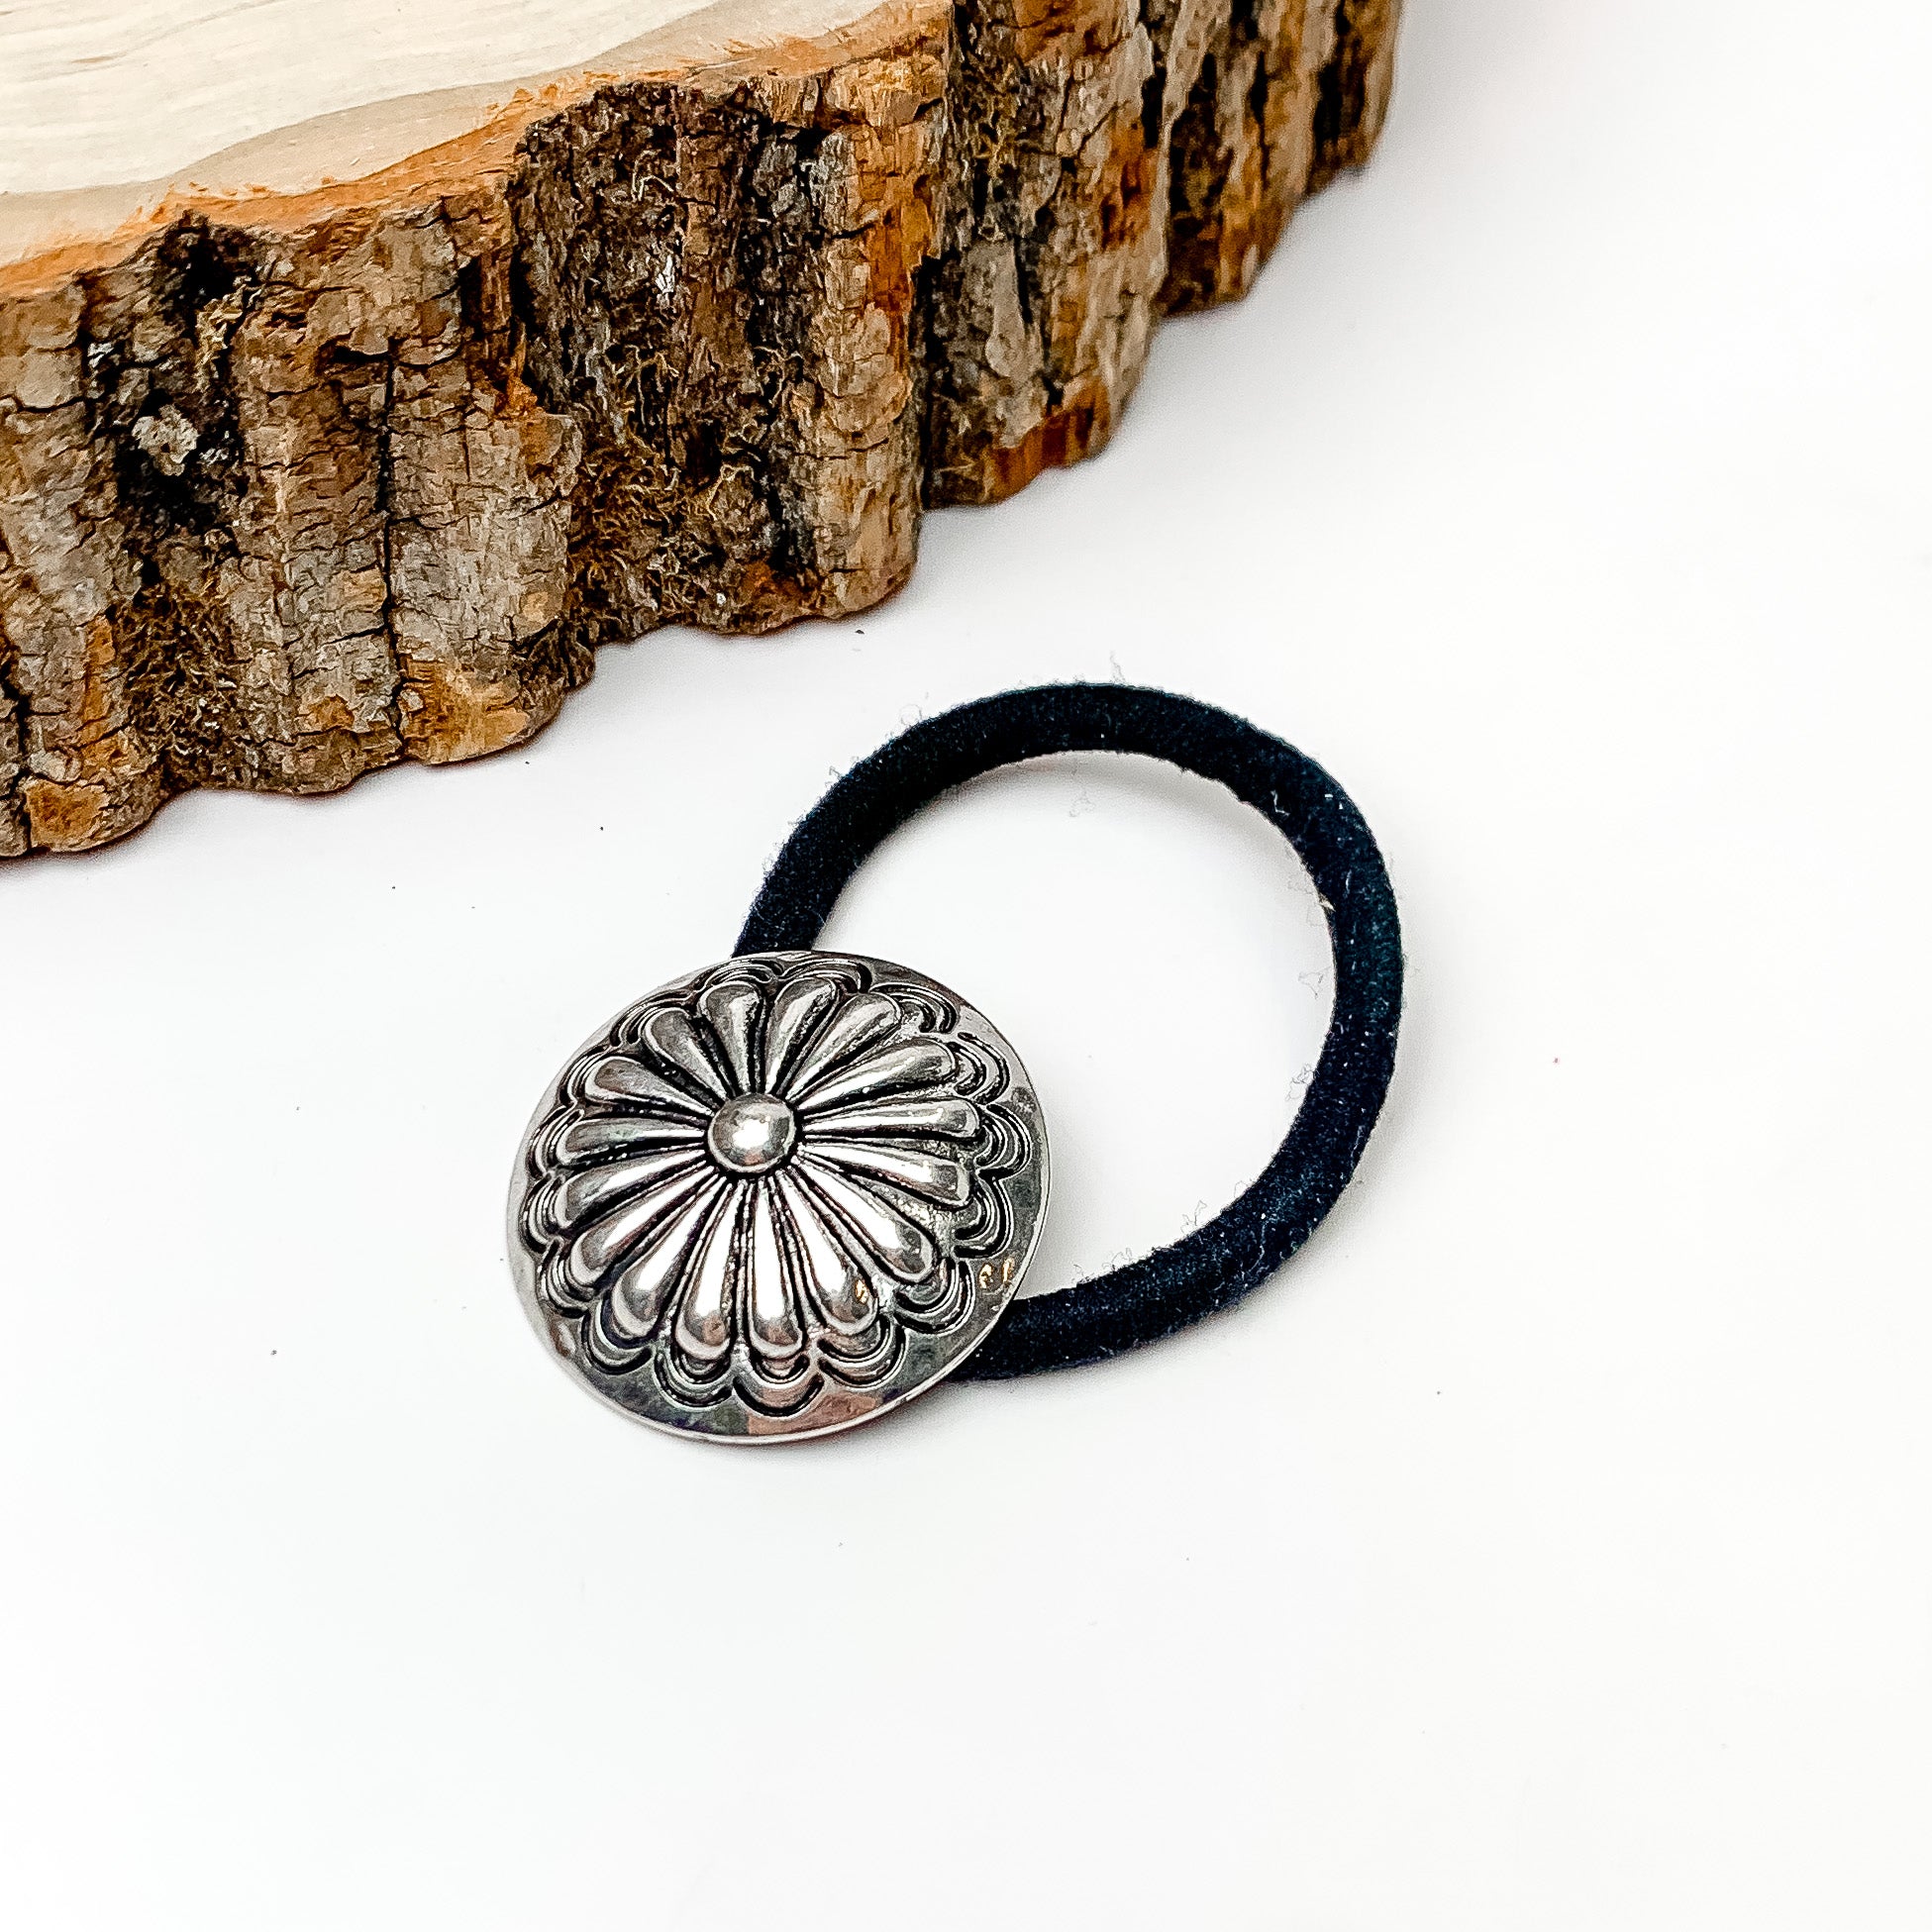 Silver Tone Circle Concho Pendant and Black Hair Tie - Giddy Up Glamour Boutique